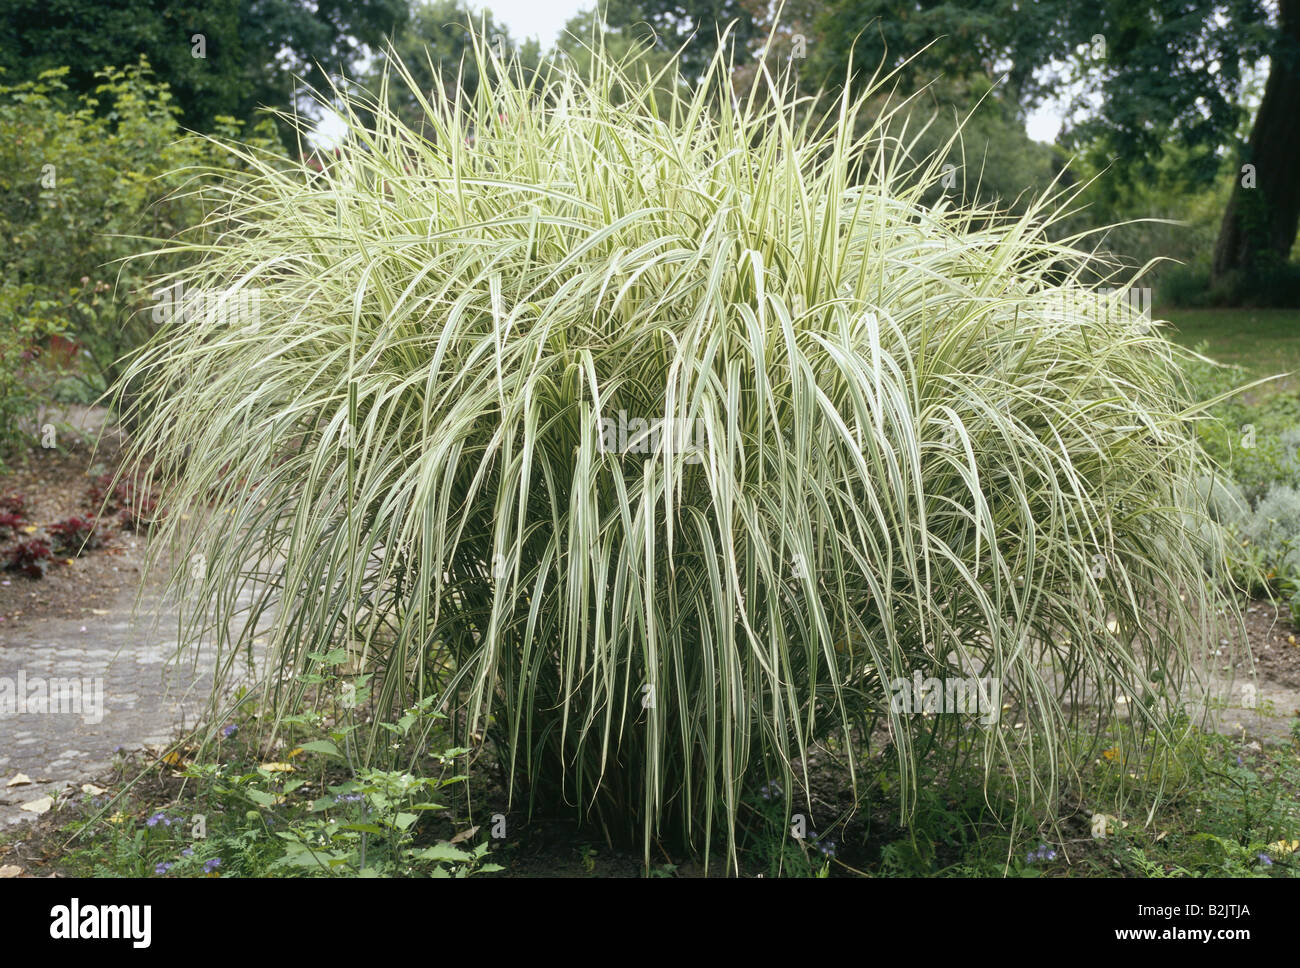 Botanik, Chinesisch silber Gras (Miscanthus sinensis), Additional-Rights - Clearance-Info - Not-Available Stockfoto